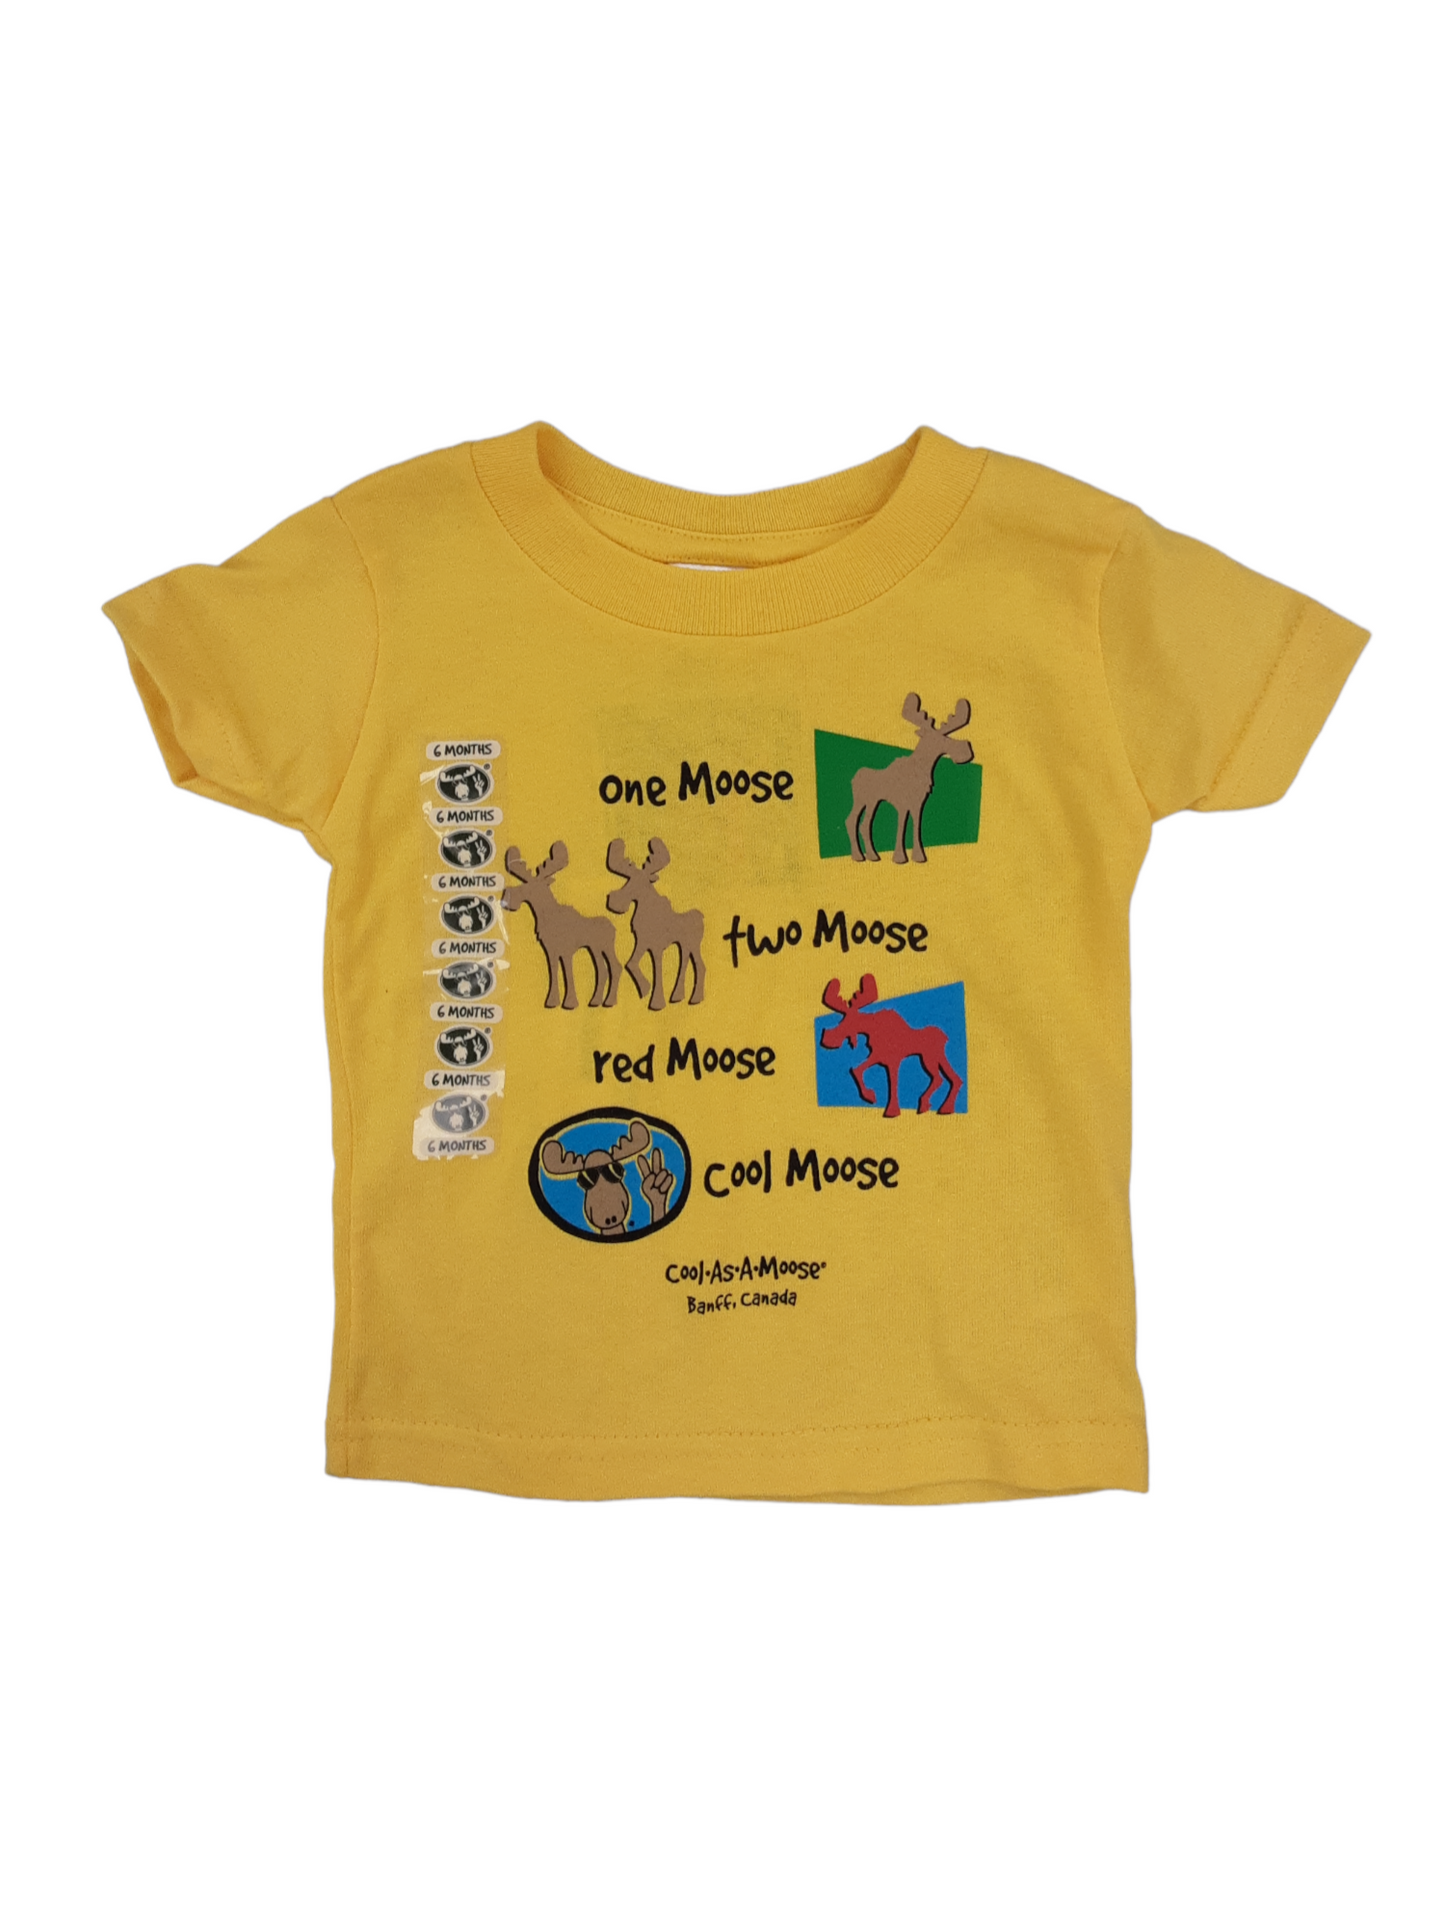 Yellow moose tee size 6 months